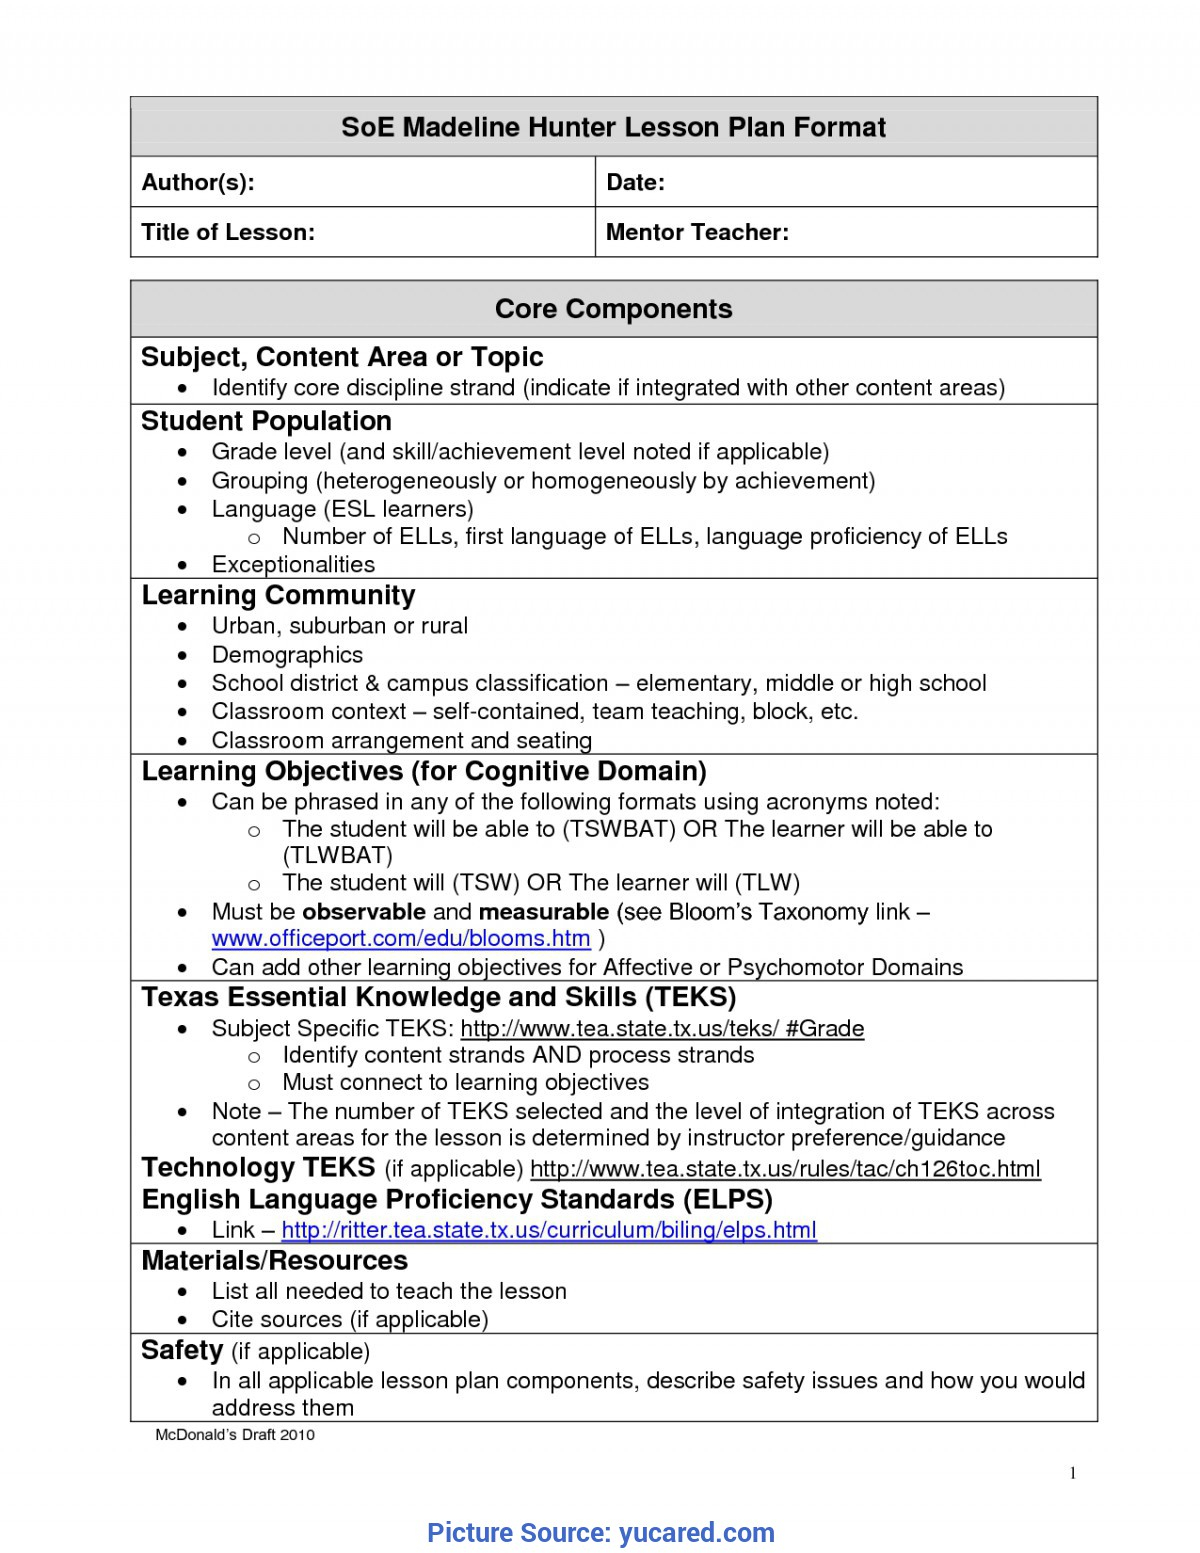 Madeline Hunter Lesson Plan Template Word | Articleezined Regarding Madeline Hunter Lesson Plan Template Blank